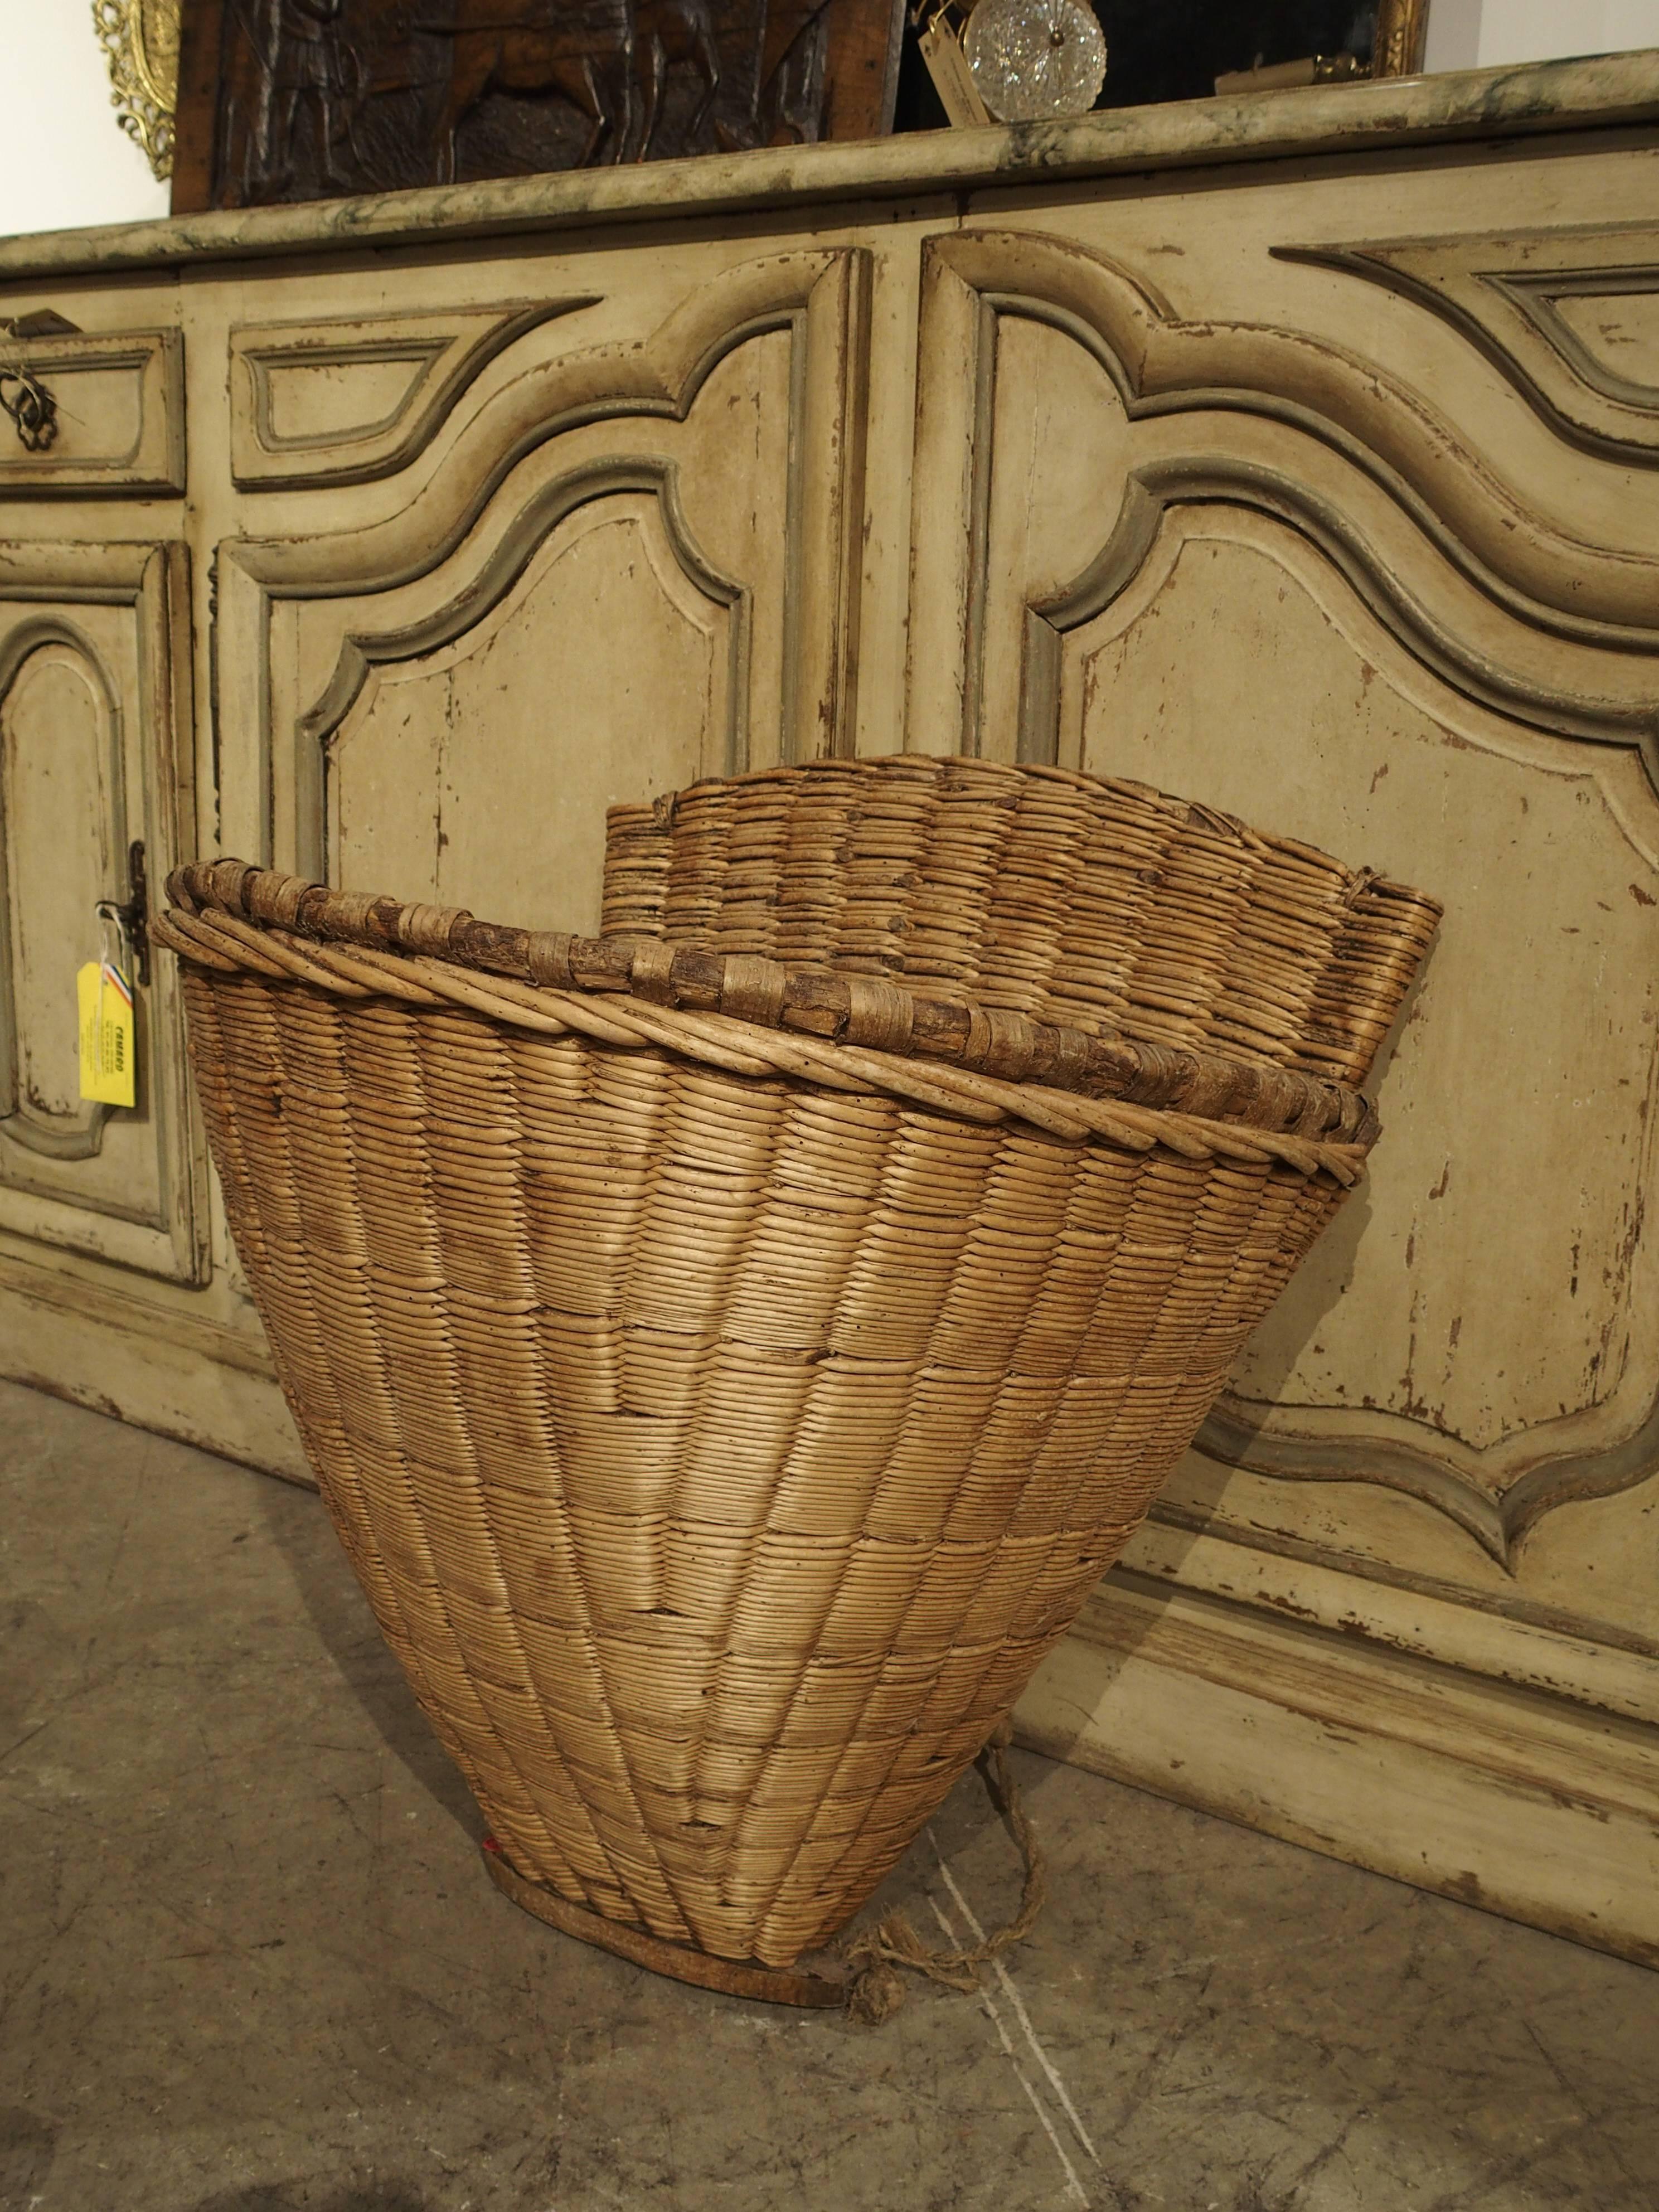 This antique French wine basket would have been used for collecting clusters of grapes from the vineyards. The basket would have been placed on the gatherer’s back while the arms went thru the woven arm holders for stabilization. These wine baskets